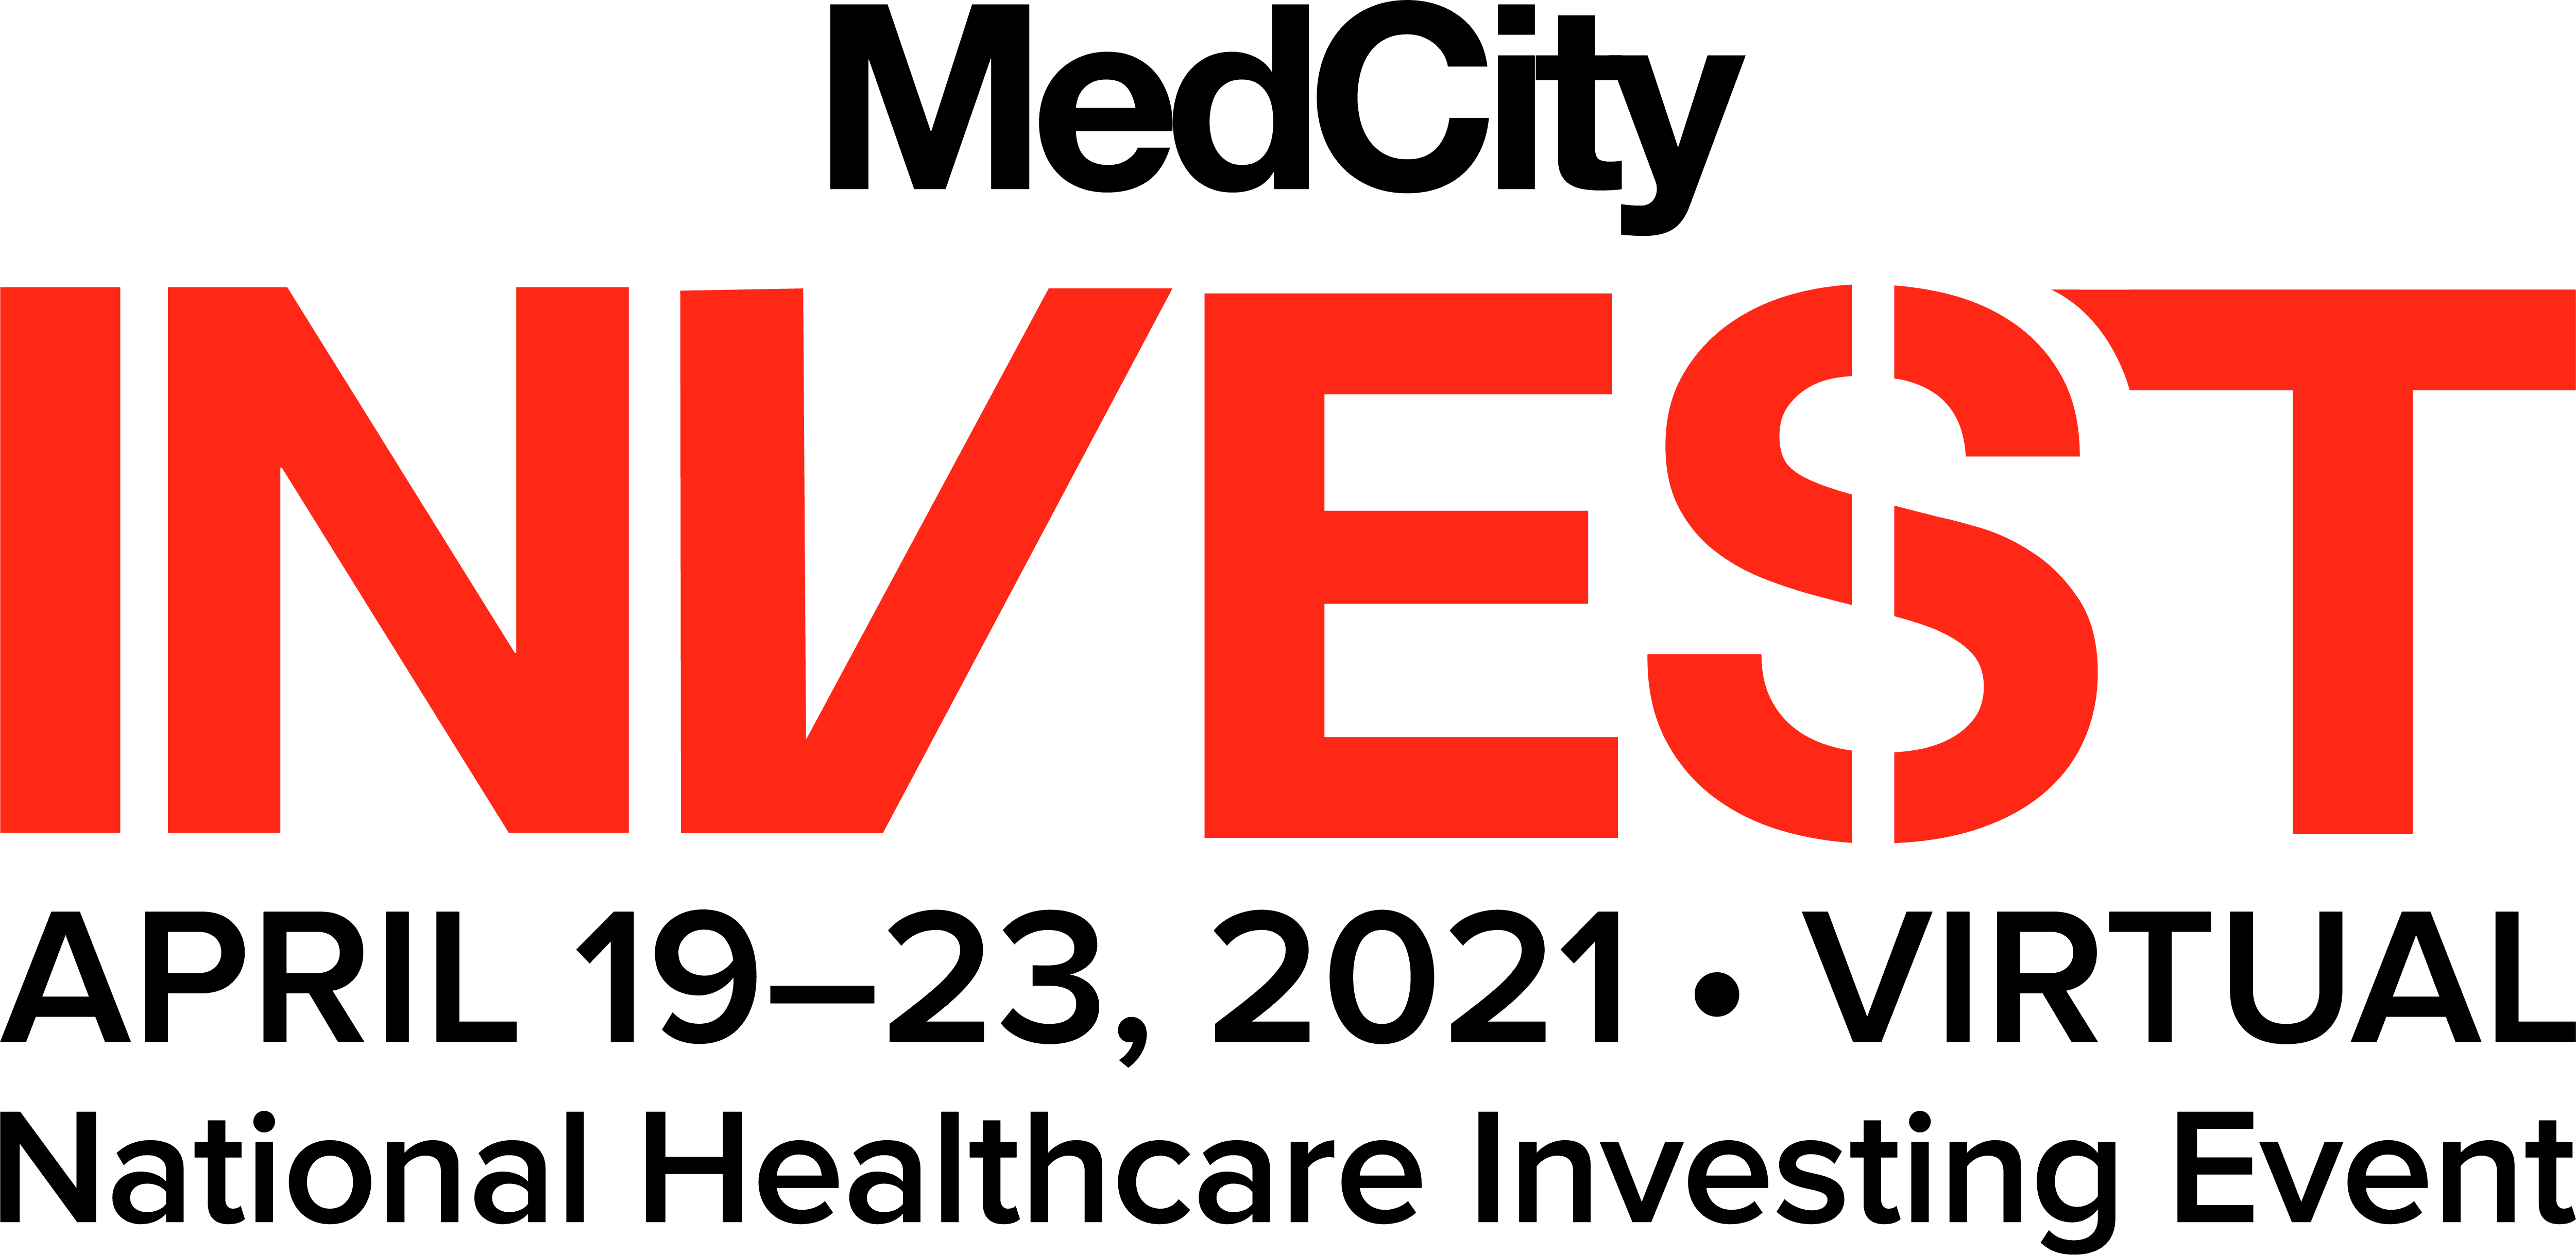 MedCity News will host its annual INVEST conference online